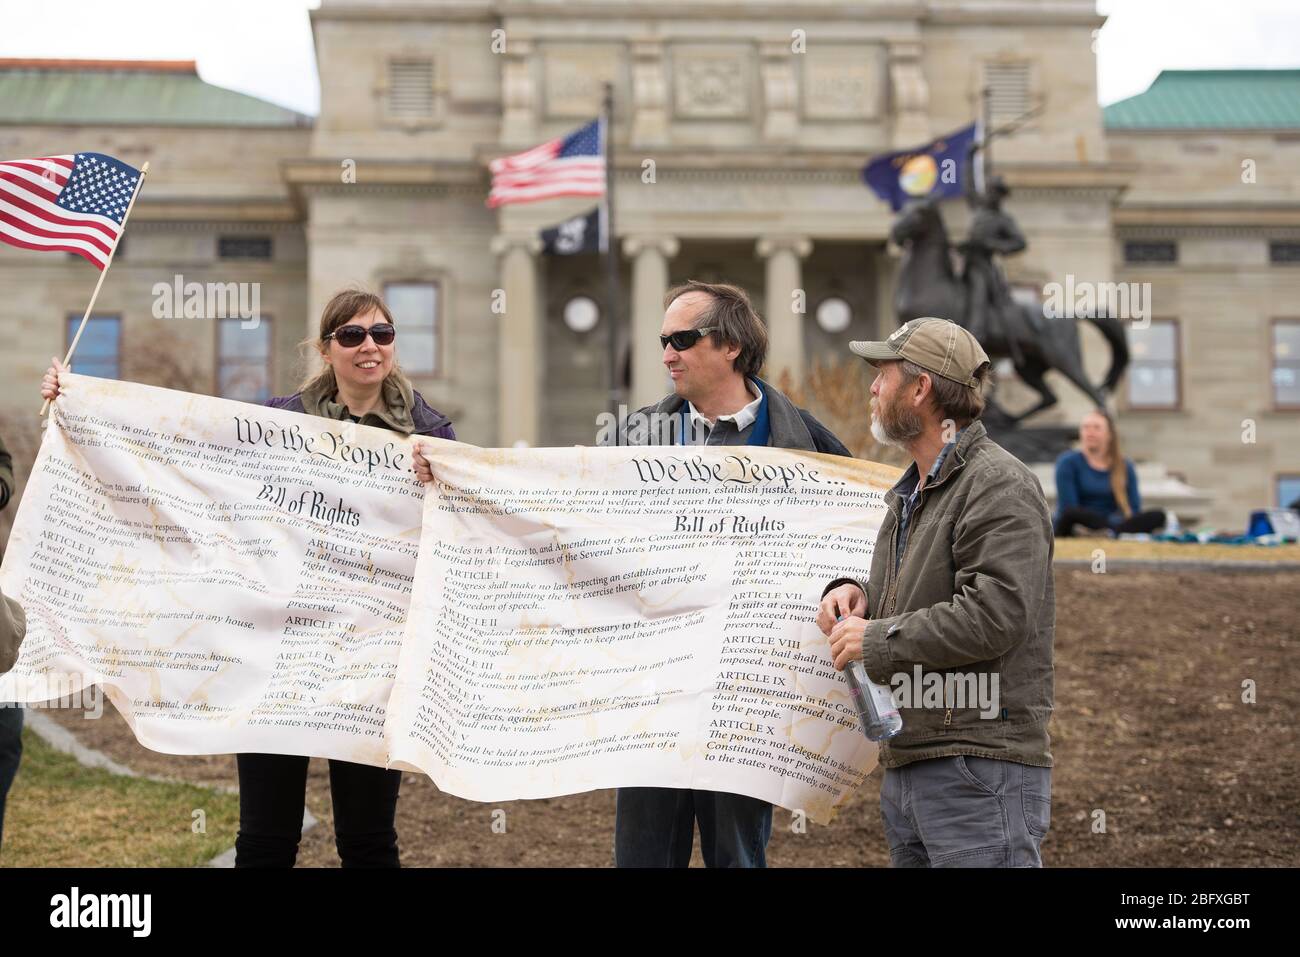 Helena, Montana - April 19, 2020: A man an woman protestor holding banners of the Bill of Rights in front of the Capitol building at a protest of the Stock Photo